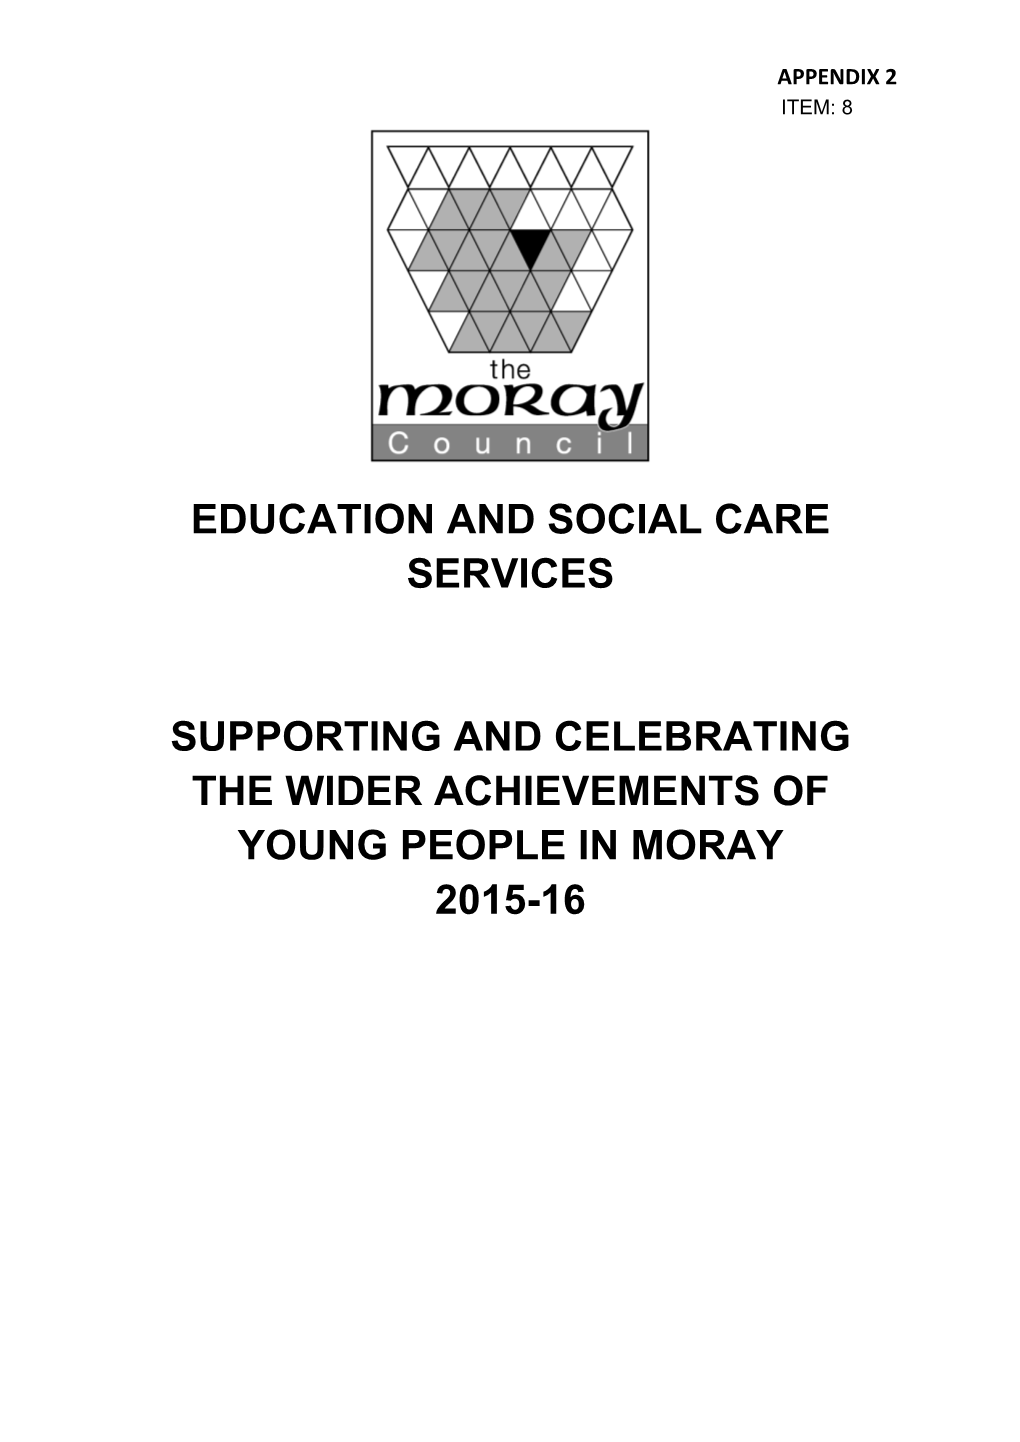 Supporting and Celebrating the Wider Achievements of Young People in Moray 2015-16